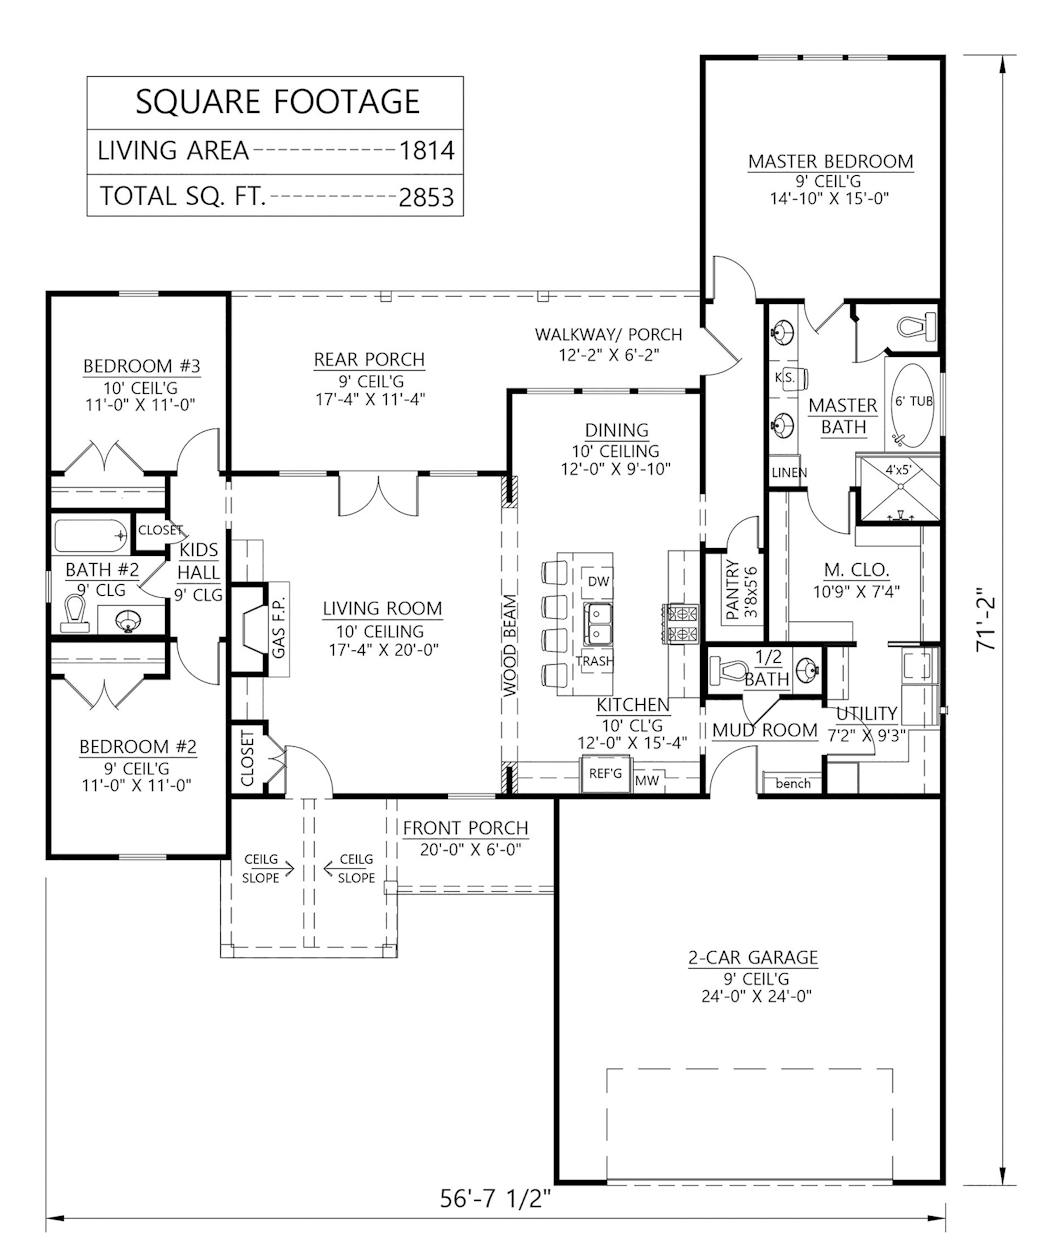 Home plan: Open and practical